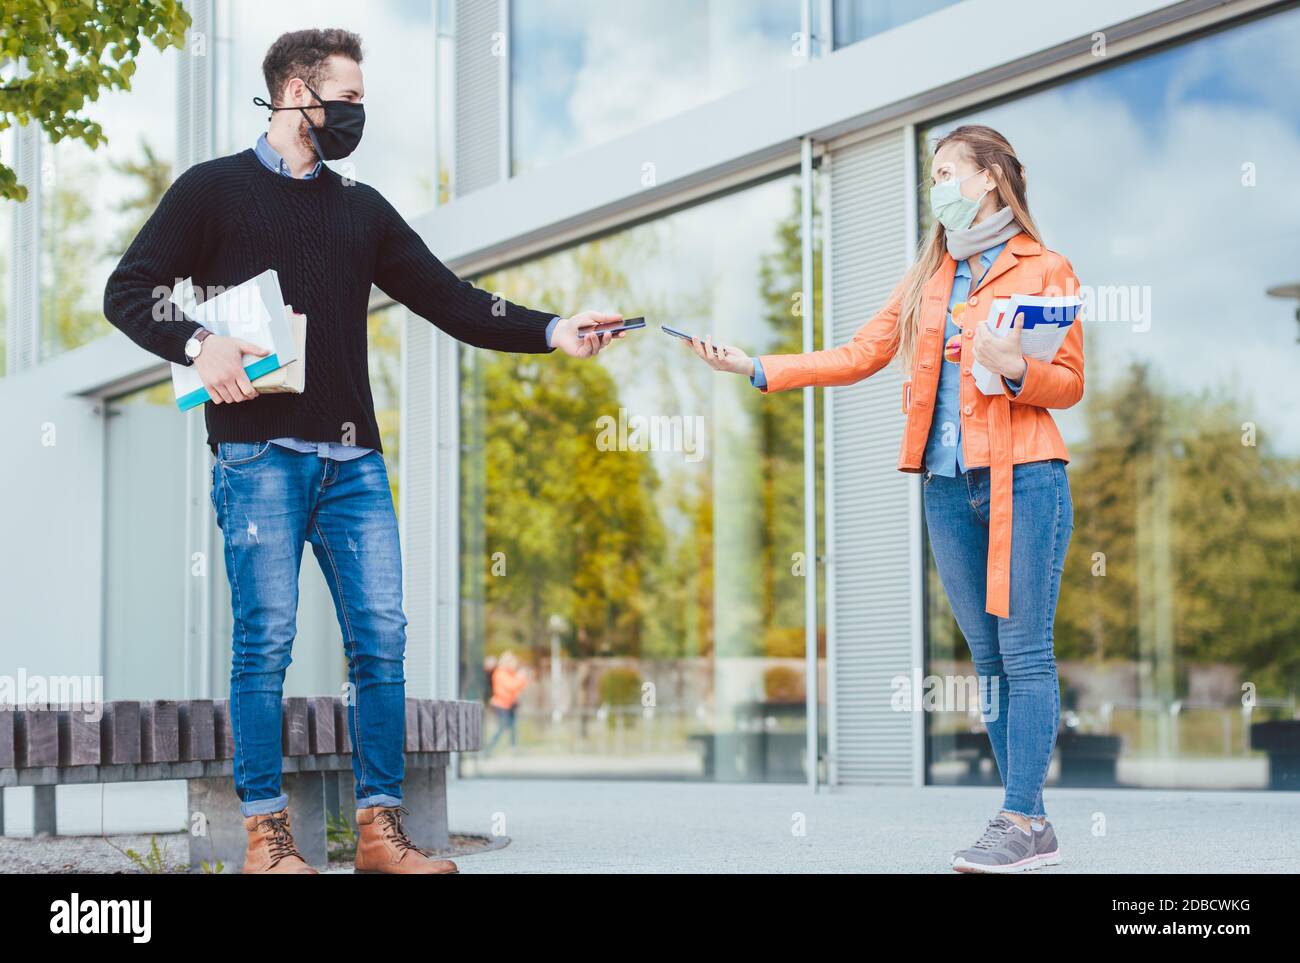 Two students during coronavirus crises with mobile phones and contract tracing app Stock Photo